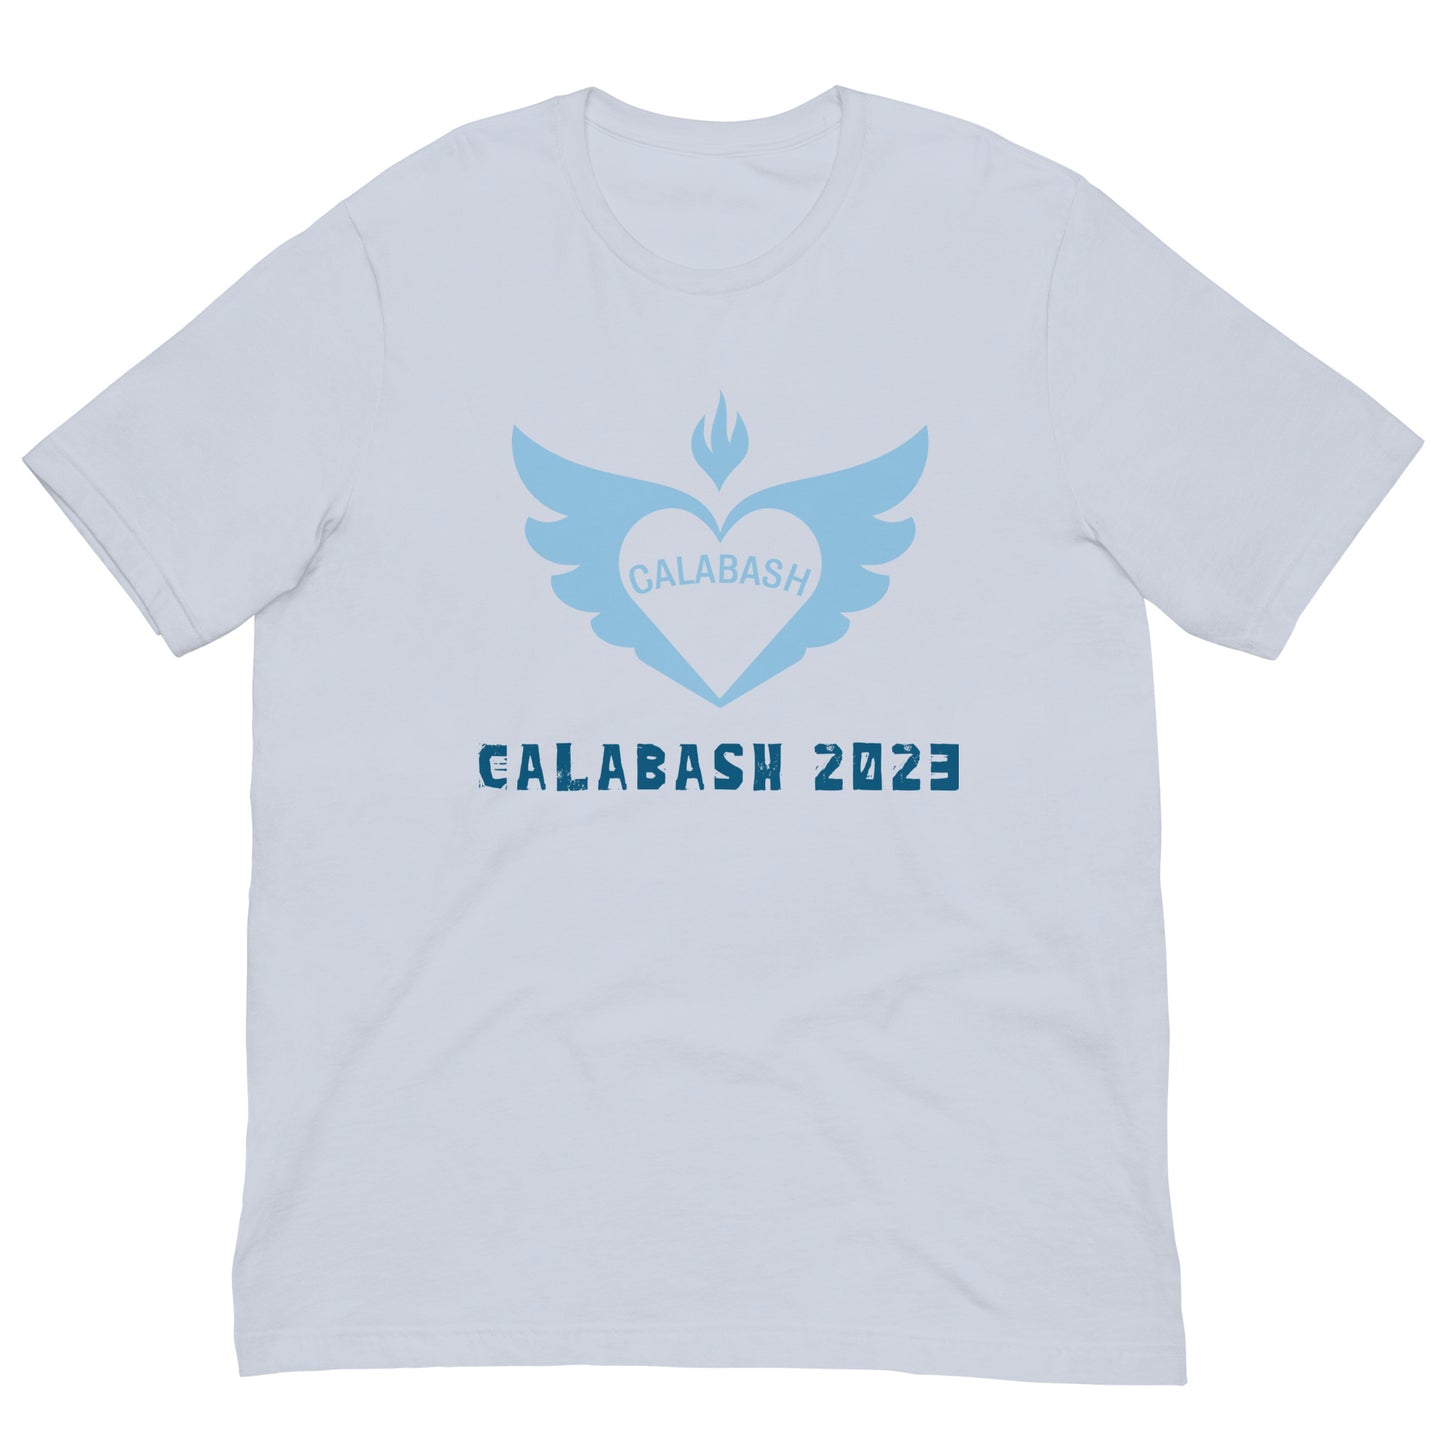 Calabash International Literary Festival 2023 Unisex Two-Sided T-Shirt in Multiple Colors